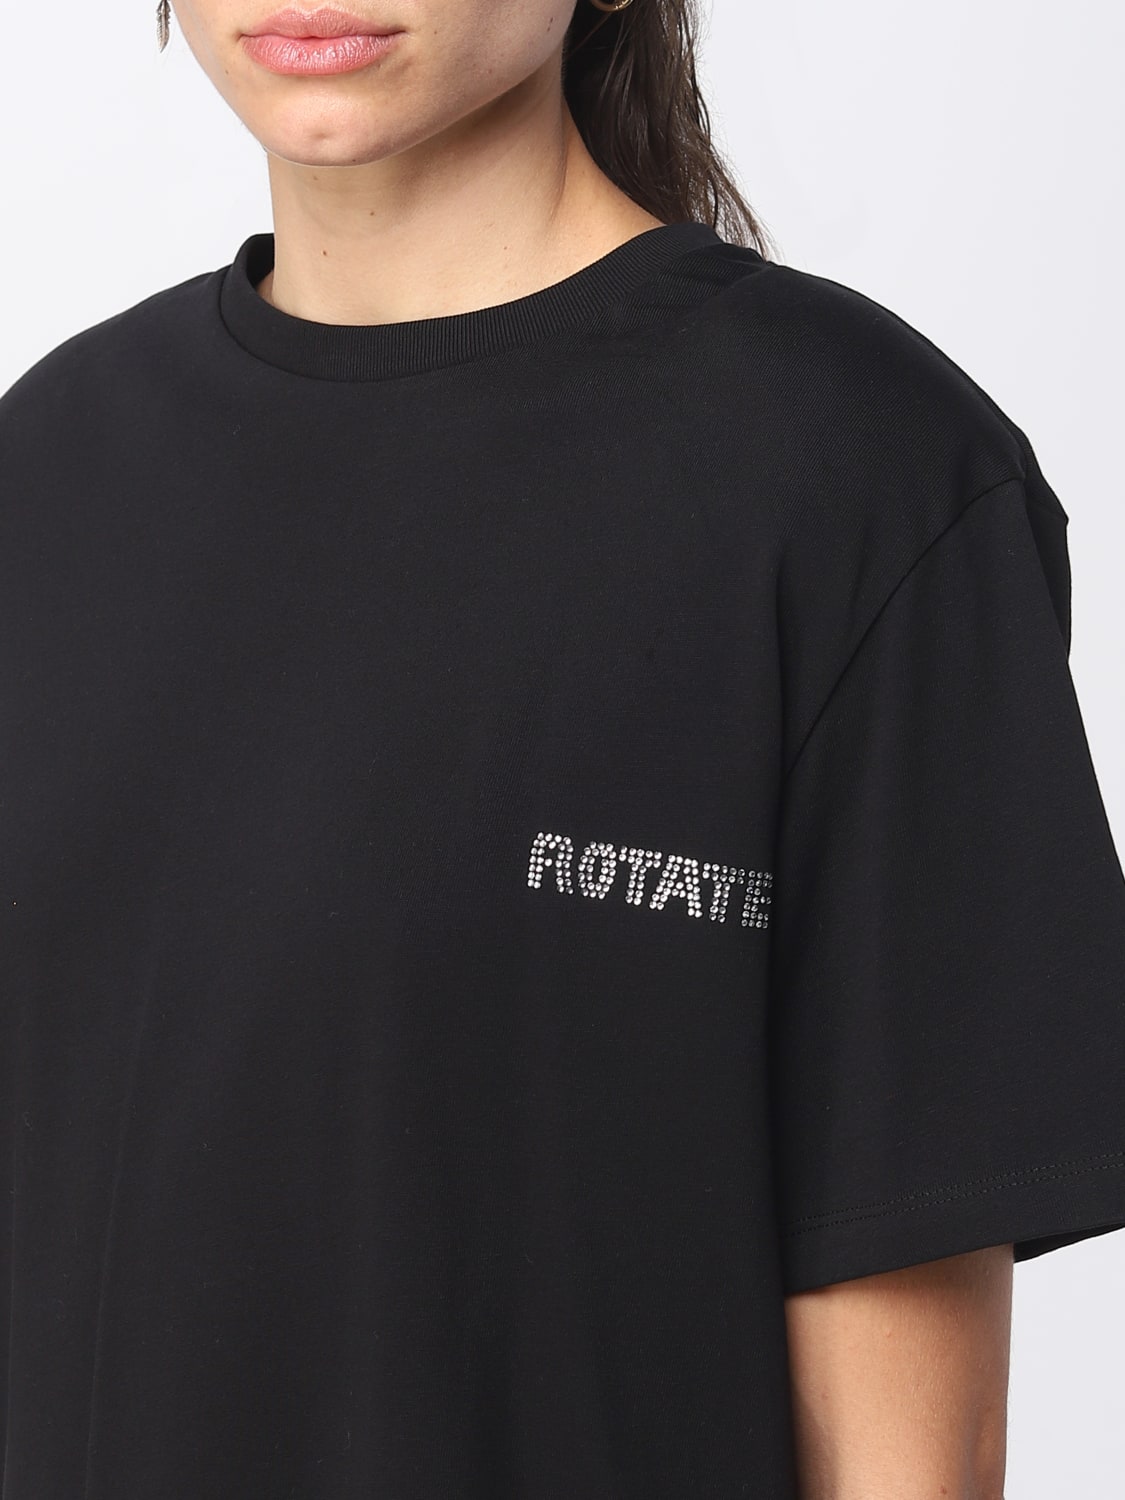 | at for Rotate t-shirt t-shirt online woman ROTATE: - Black 111212100